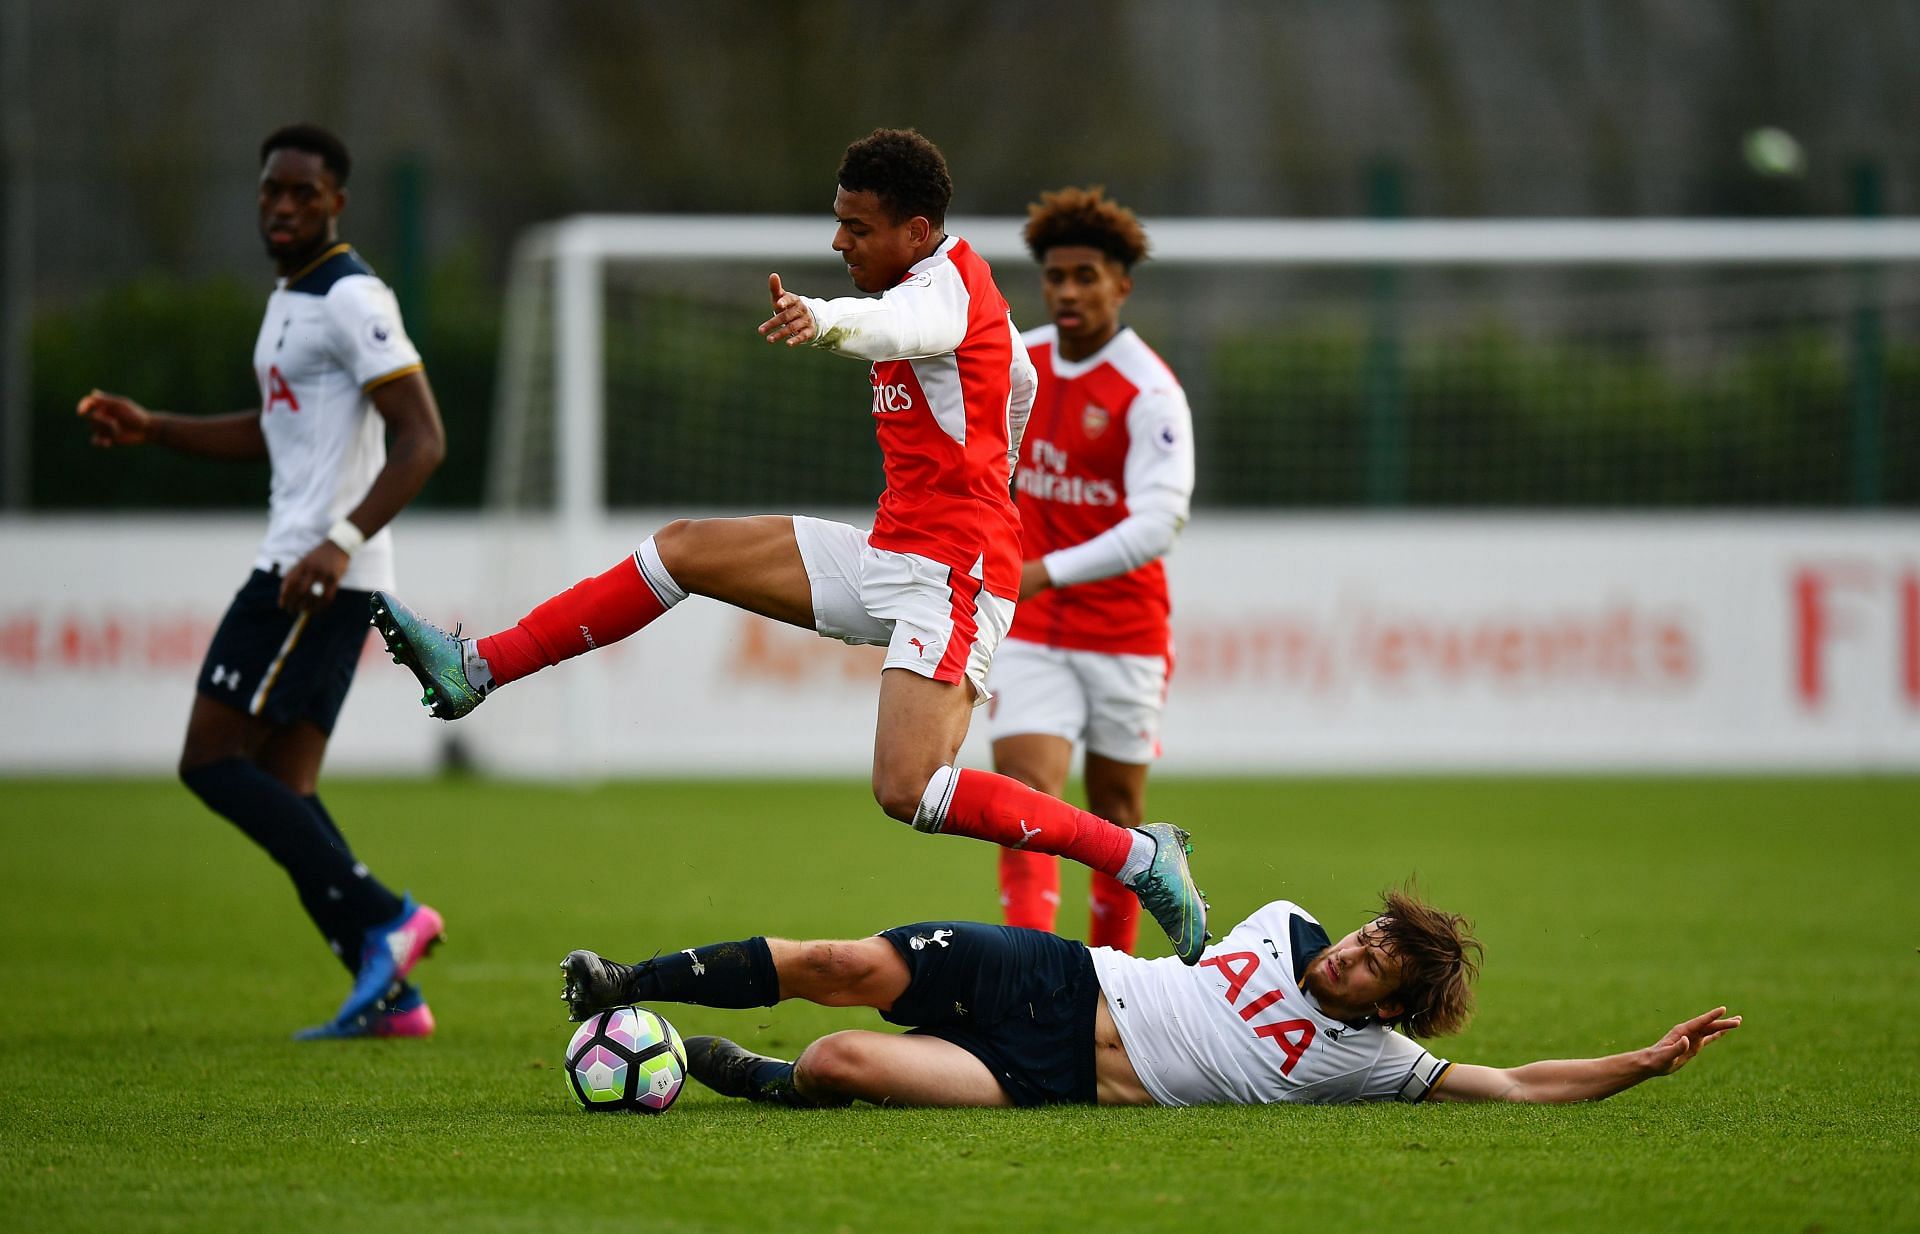 Donyell Malen has done well after leaving Arsenal